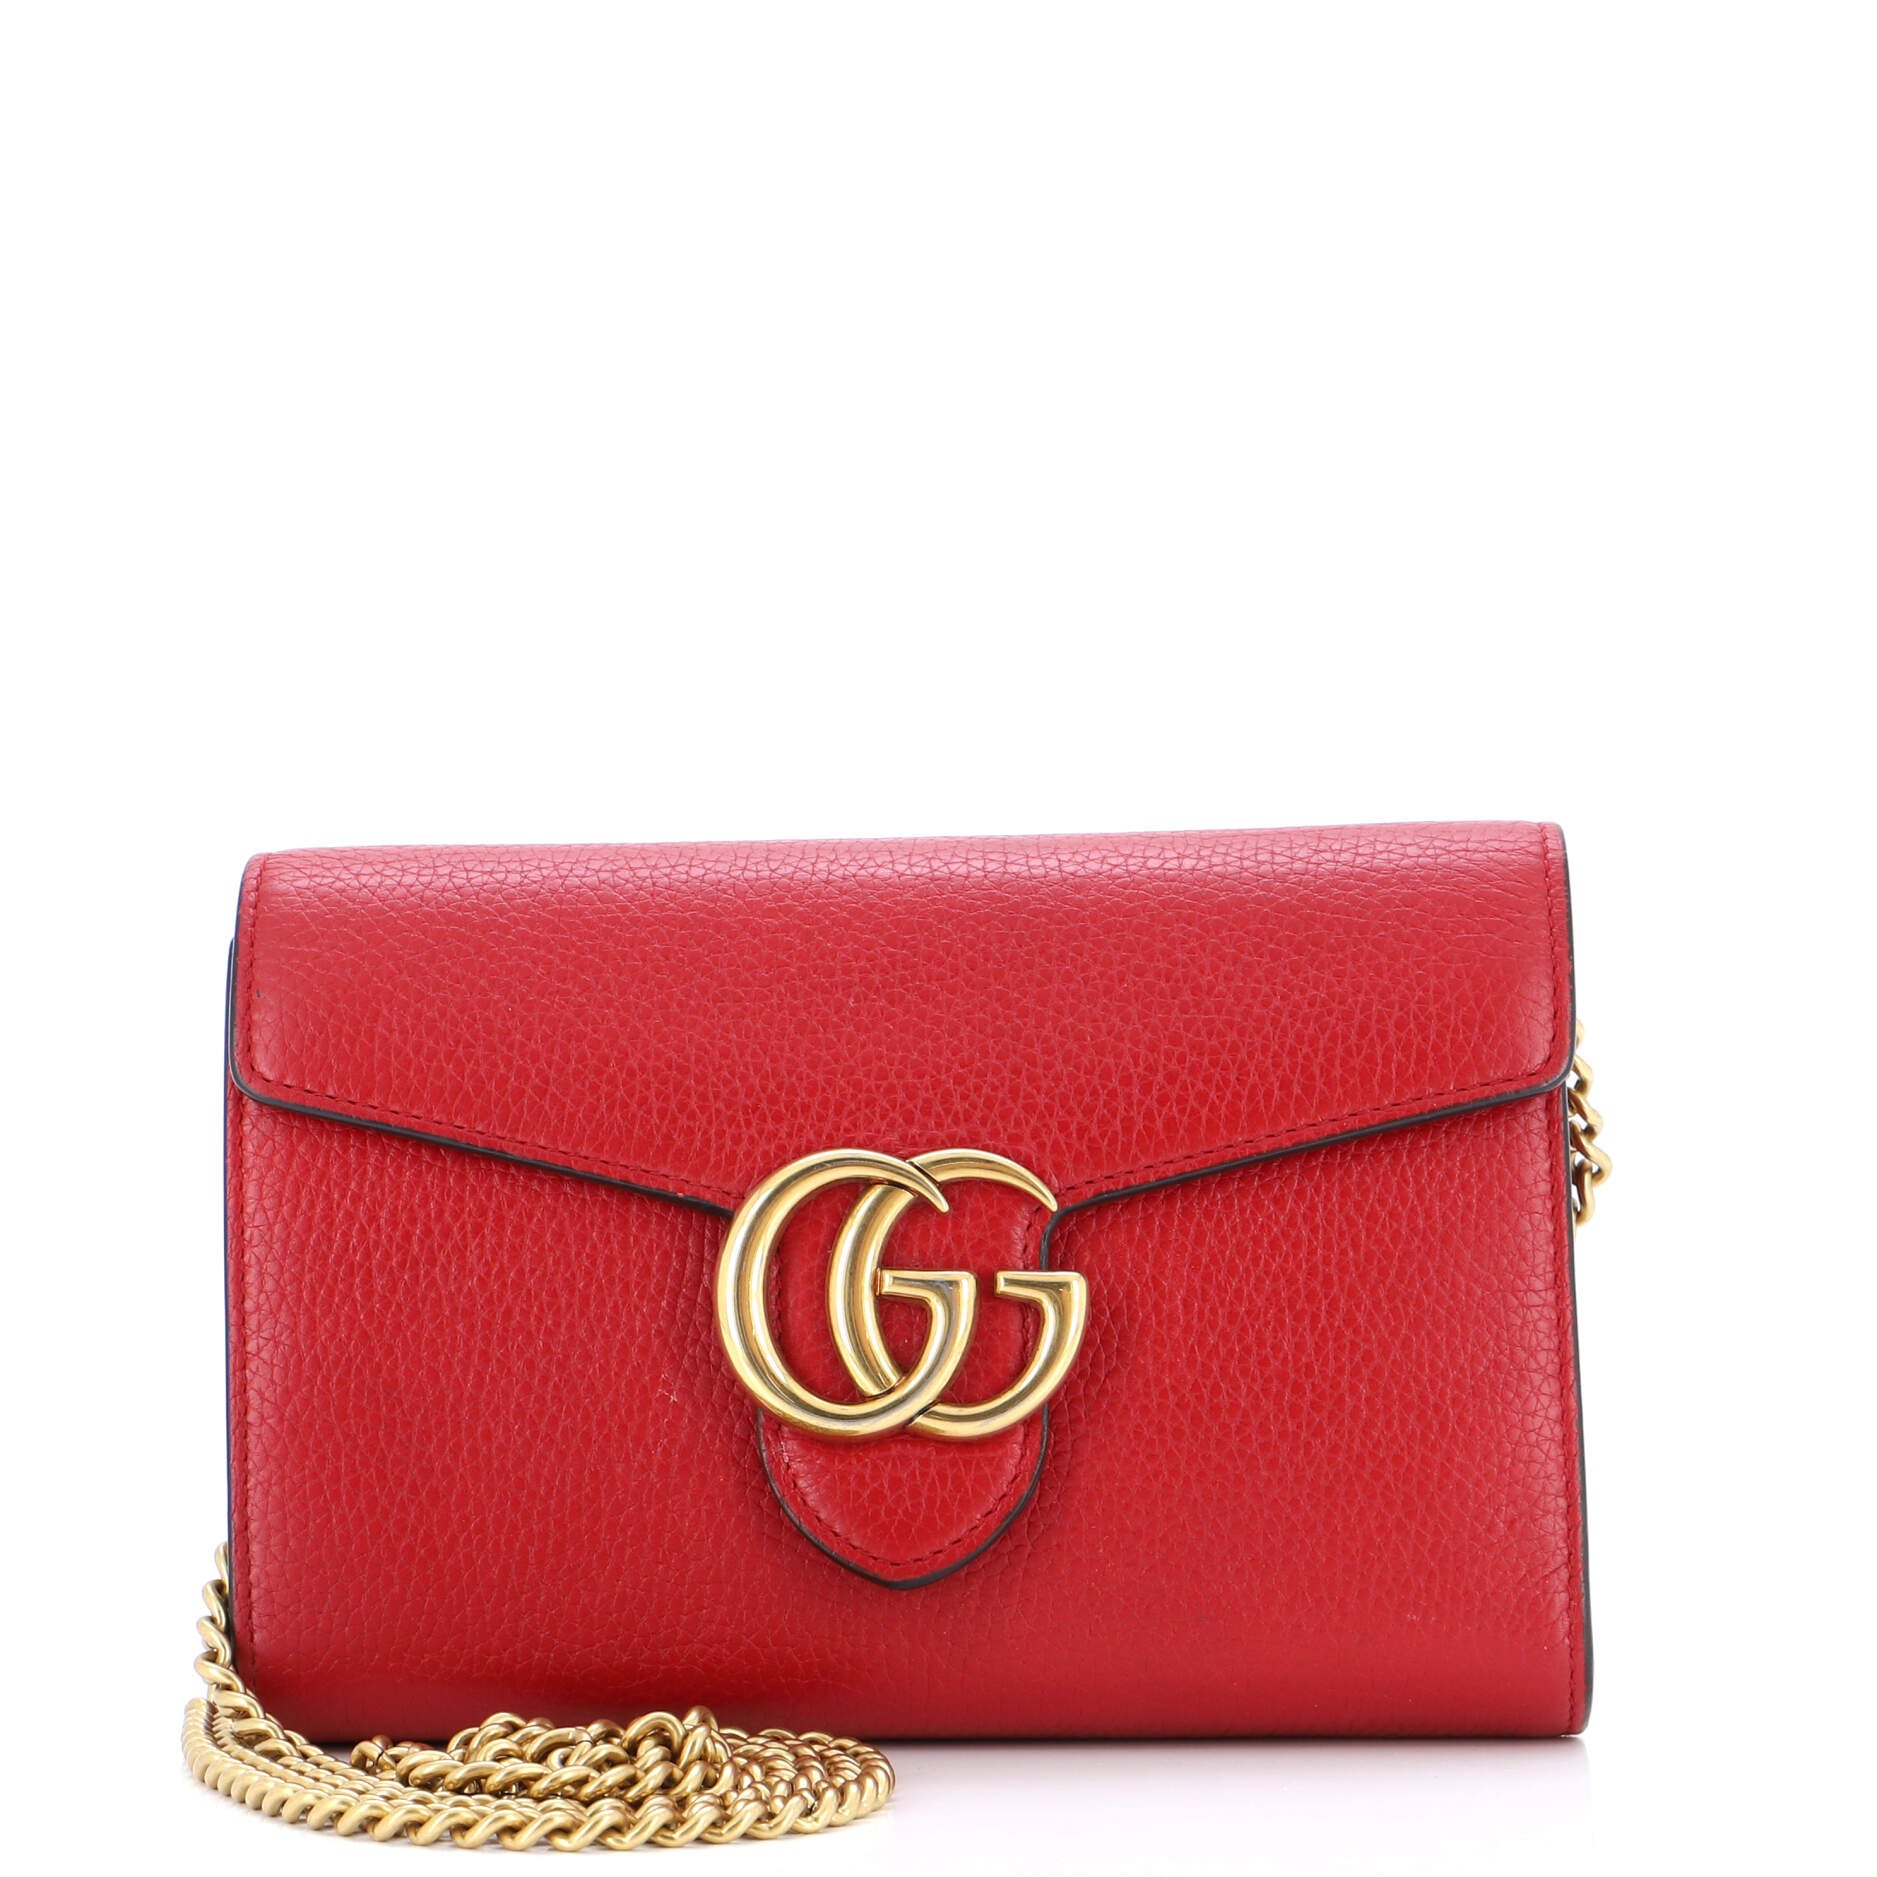 GG Marmont Chain Wallet Leather Mini